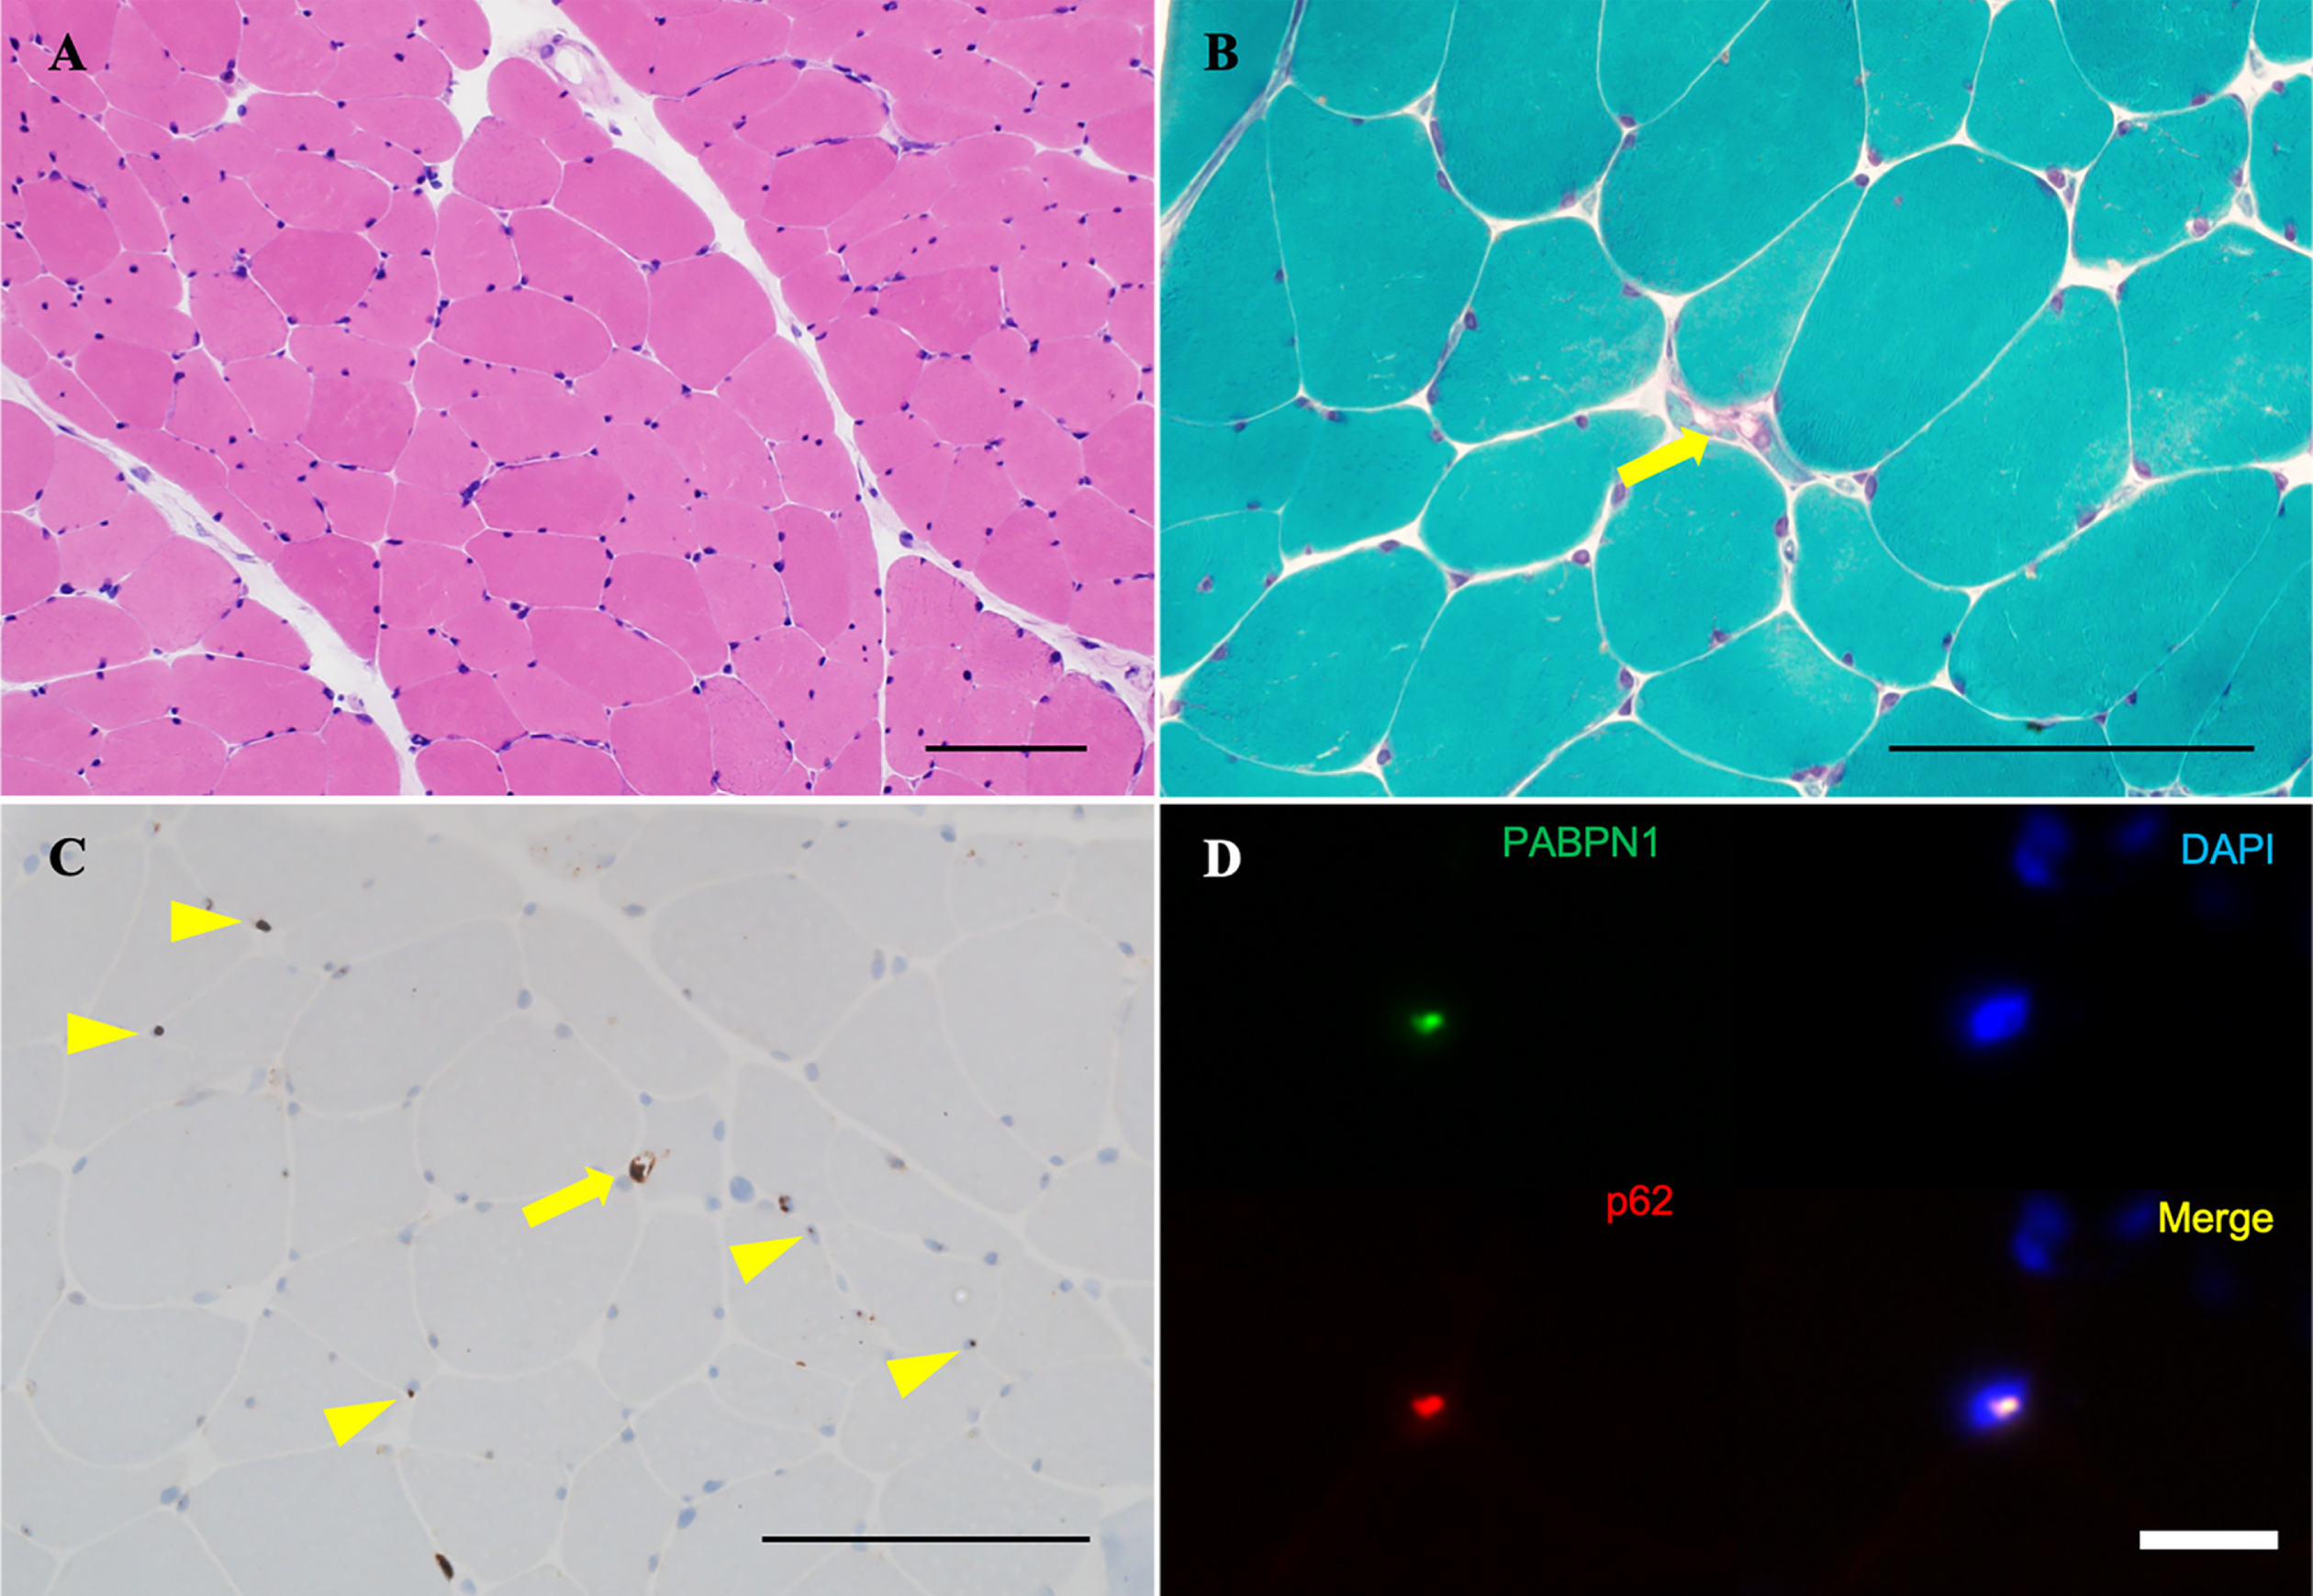 Biopsy sample of the left rectus femoris. (A) Variable myofiber size and the absence of inflammatory cells, necrotic fibers, or regenerating fibers are observed on H&E. (B) On modified Gömöri trichrome staining, rimmed vacuoles are observed in only one fiber (arrow). (C) Intracytoplasmic accumulation of p62 aggregates are observed in only one fiber (arrow), along with some p62-positive intranuclear inclusions on immunohistochemistry (arrowheads). (D) Nuclear accumulation of insoluble PABPN1 is highlighted by anti-PABPN1 antibody in immunohistochemistry (arrows). Scale bars: 100μm.